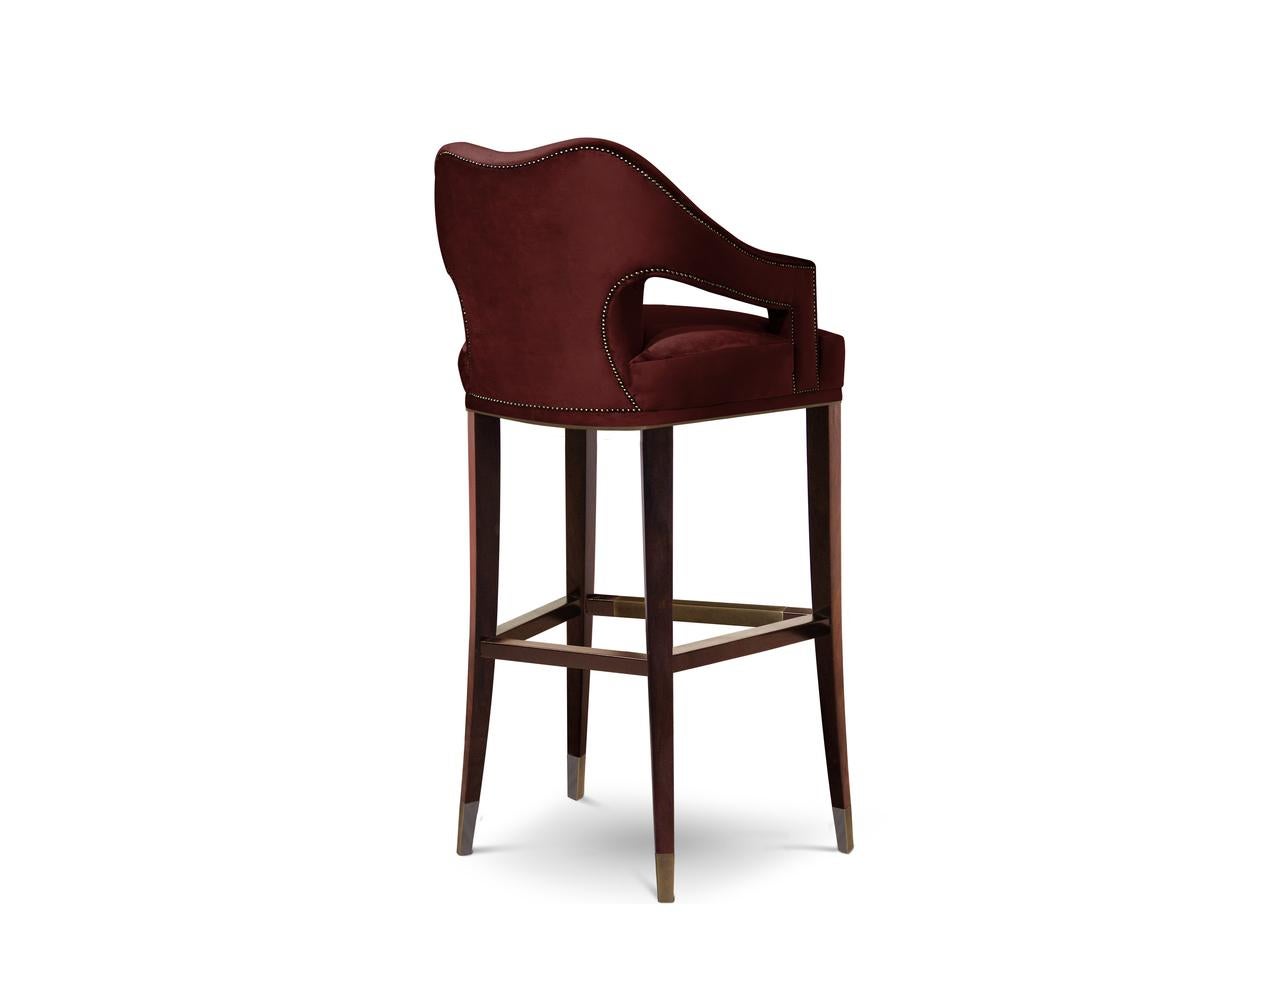 Symbol of knowledge and rebirth, Nº20 Bar Chair was raised through a long journey of 24 prototypes. This fabric chair, upholstered in twill and with legs in ash with walnut stain matte varnish, features a nailhead trim that adds subtle